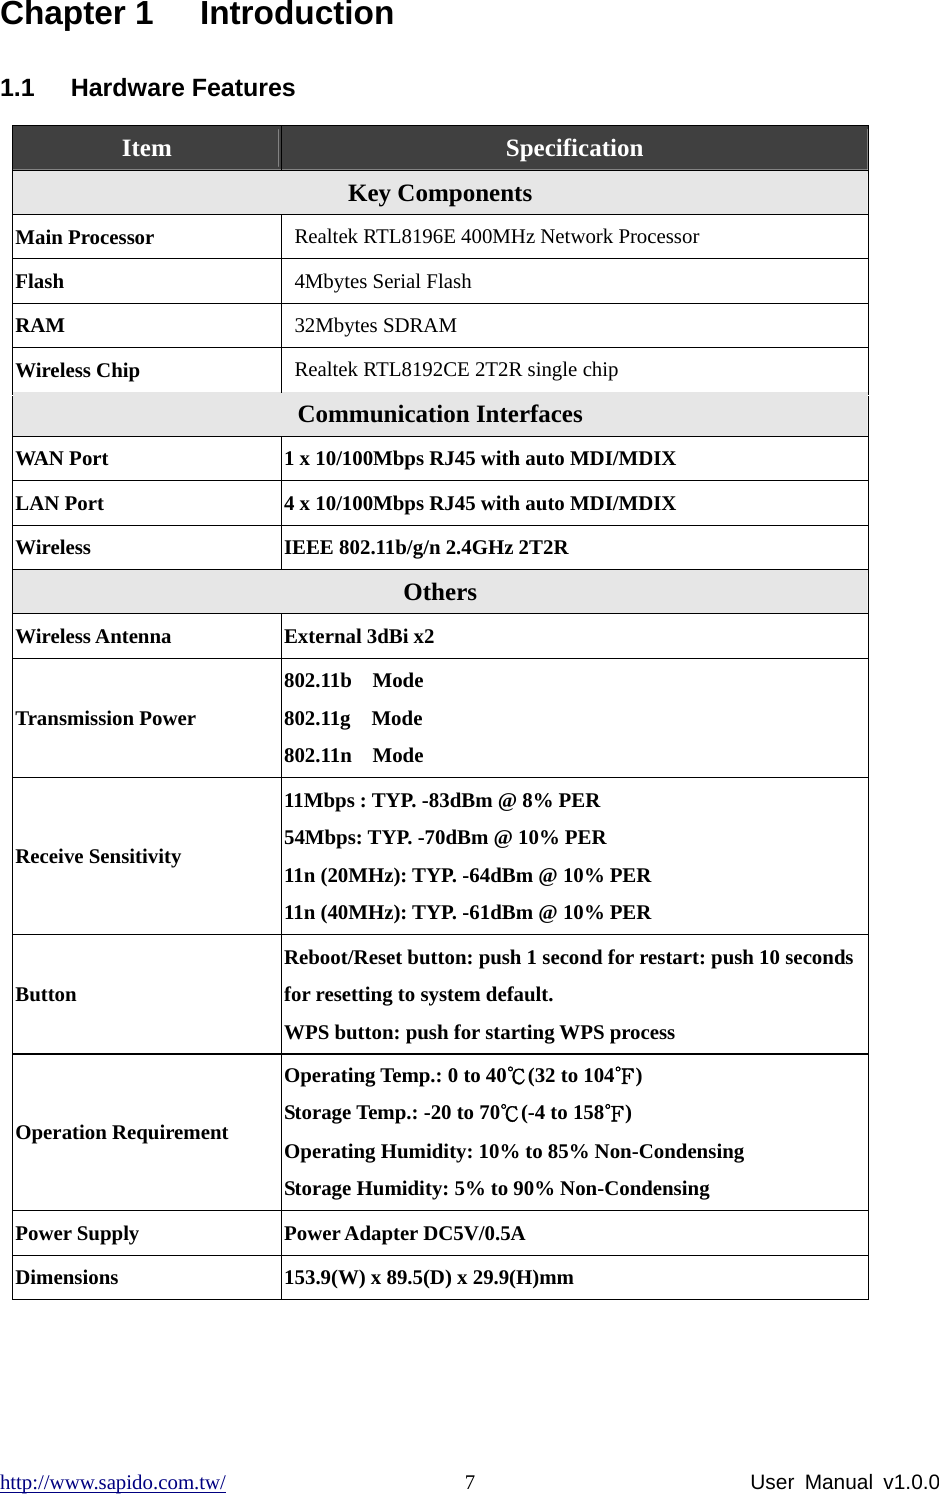 http://www.sapido.com.tw/                User Manual v1.0.0 7Chapter 1  Introduction 1.1 Hardware Features Item  Specification Key Components Main Processor  Realtek RTL8196E 400MHz Network Processor Flash  4Mbytes Serial Flash RAM  32Mbytes SDRAM Wireless Chip  Realtek RTL8192CE 2T2R single chip Communication Interfaces WAN Port  1 x 10/100Mbps RJ45 with auto MDI/MDIX LAN Port  4 x 10/100Mbps RJ45 with auto MDI/MDIX Wireless  IEEE 802.11b/g/n 2.4GHz 2T2R Others Wireless Antenna  External 3dBi x2 Transmission Power 802.11b  Mode 802.11g  Mode 802.11n  Mode Receive Sensitivity 11Mbps : TYP. -83dBm @ 8% PER 54Mbps: TYP. -70dBm @ 10% PER 11n (20MHz): TYP. -64dBm @ 10% PER 11n (40MHz): TYP. -61dBm @ 10% PER Button Reboot/Reset button: push 1 second for restart: push 10 seconds for resetting to system default. WPS button: push for starting WPS process Operation Requirement Operating Temp.: 0 to 40℃(32 to 104℉) Storage Temp.: -20 to 70℃(-4 to 158℉) Operating Humidity: 10% to 85% Non-Condensing Storage Humidity: 5% to 90% Non-Condensing Power Supply  Power Adapter DC5V/0.5A Dimensions  153.9(W) x 89.5(D) x 29.9(H)mm  